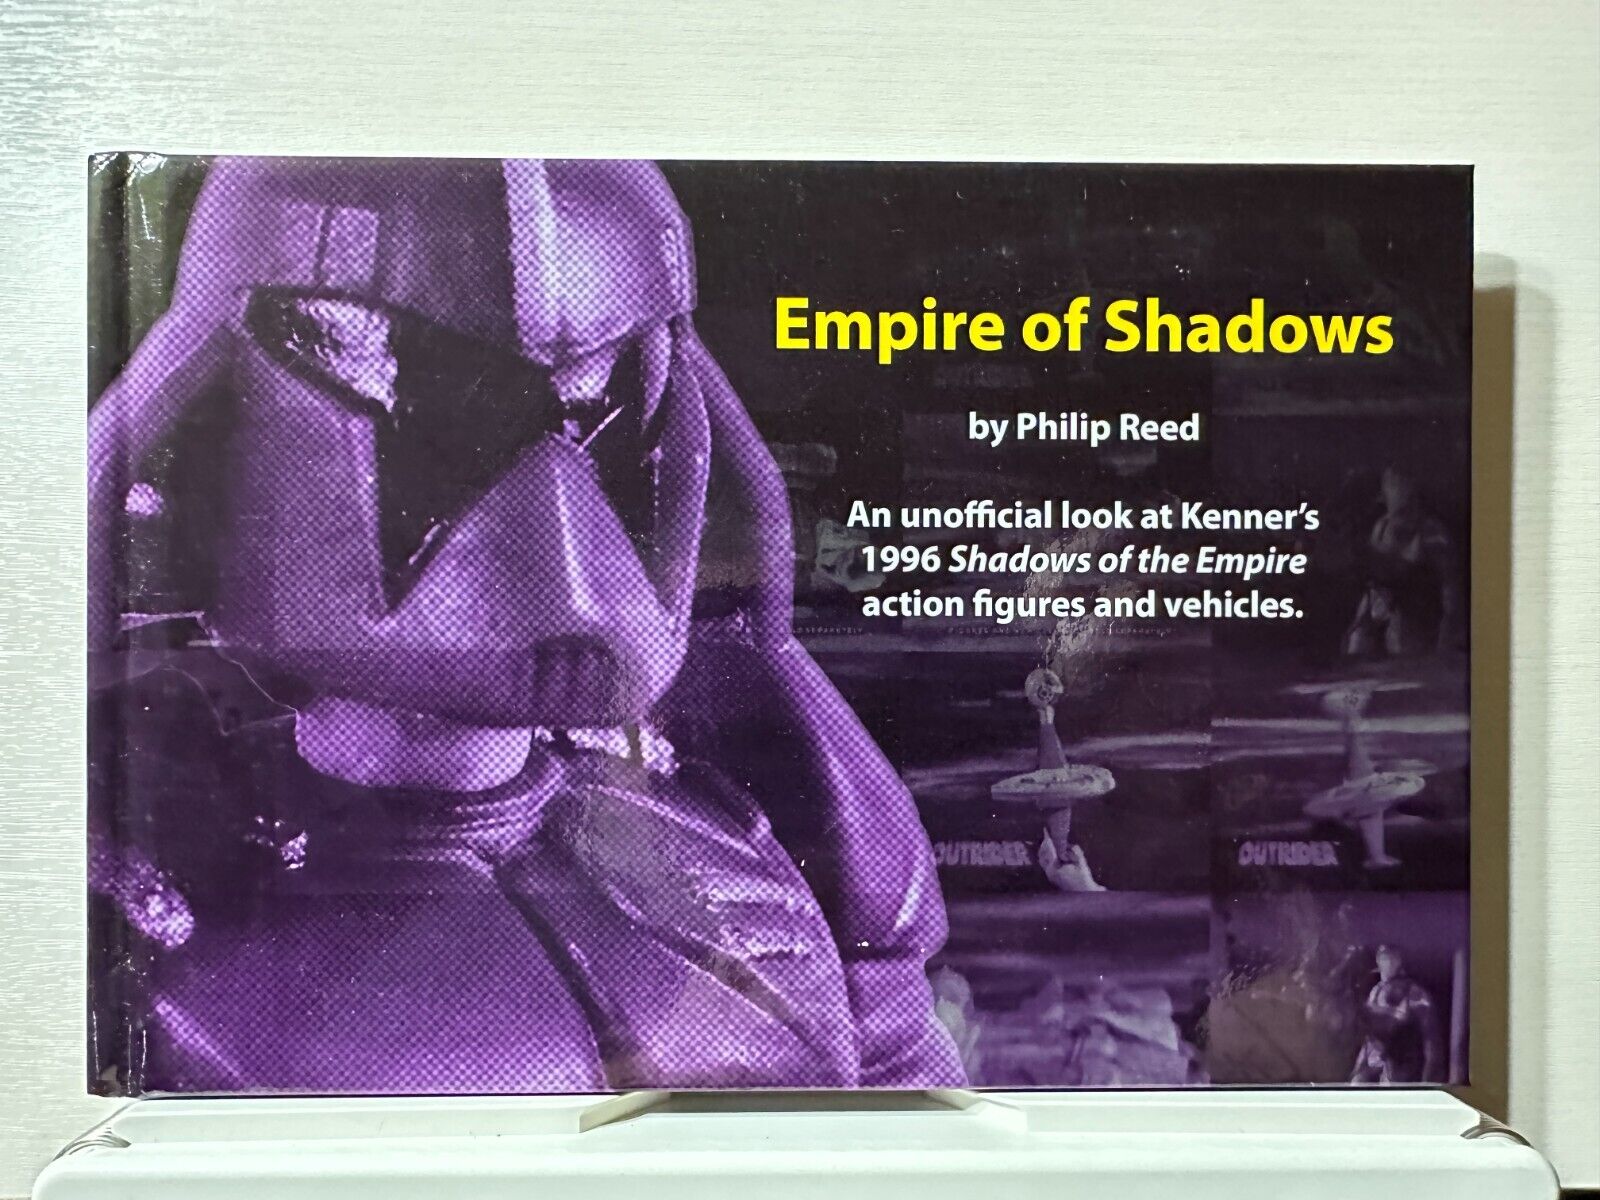 Kenner Star Wars Book - Empire of Shadows by Philip Reed